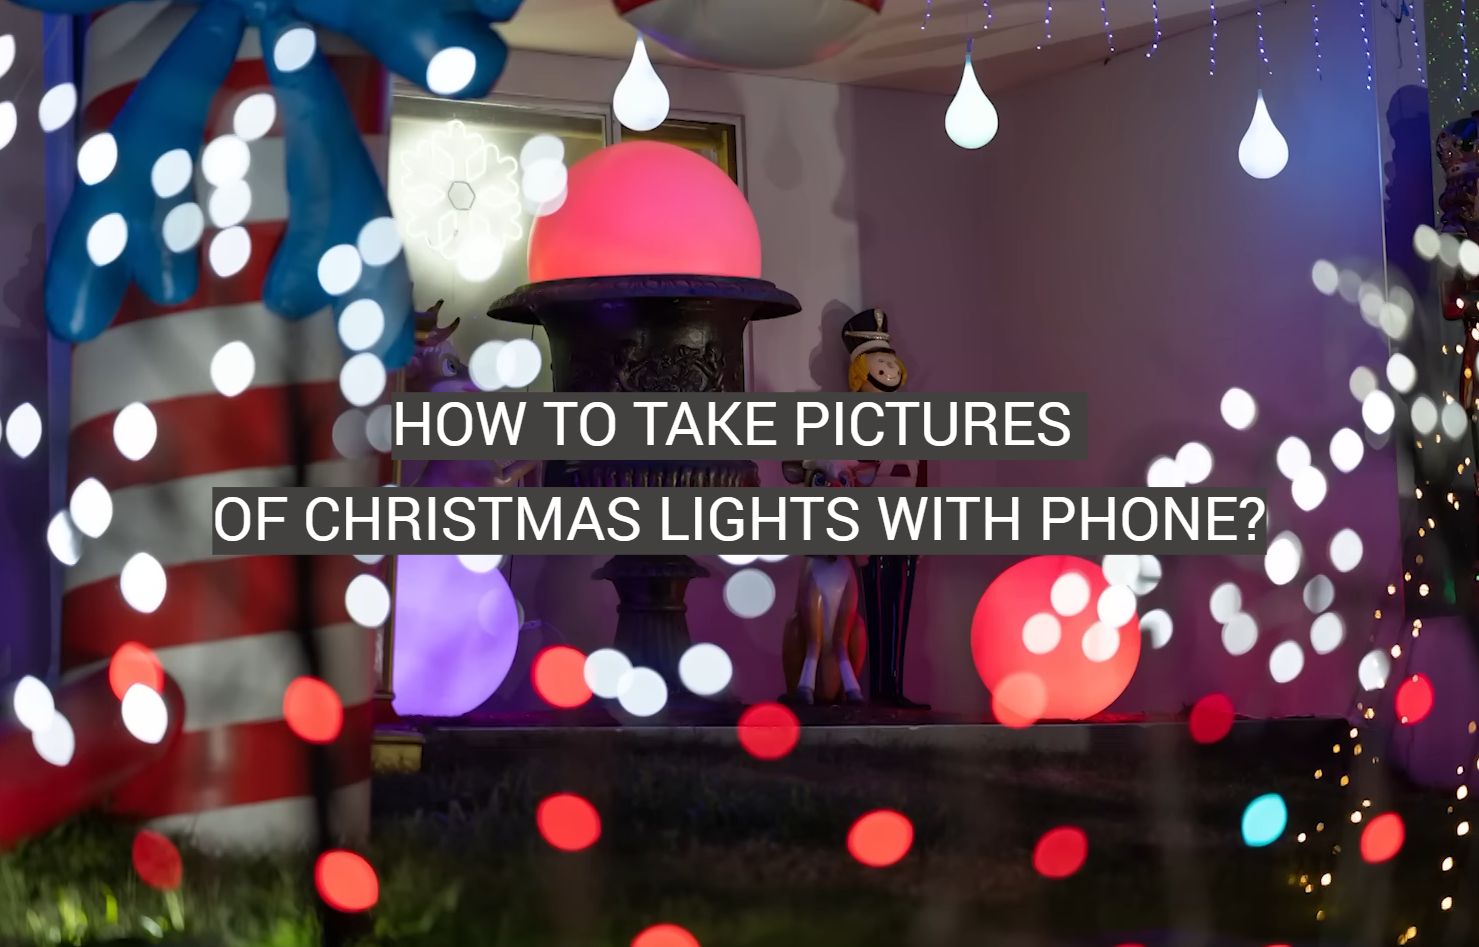 How to Take Pictures of Christmas Lights With Phone?